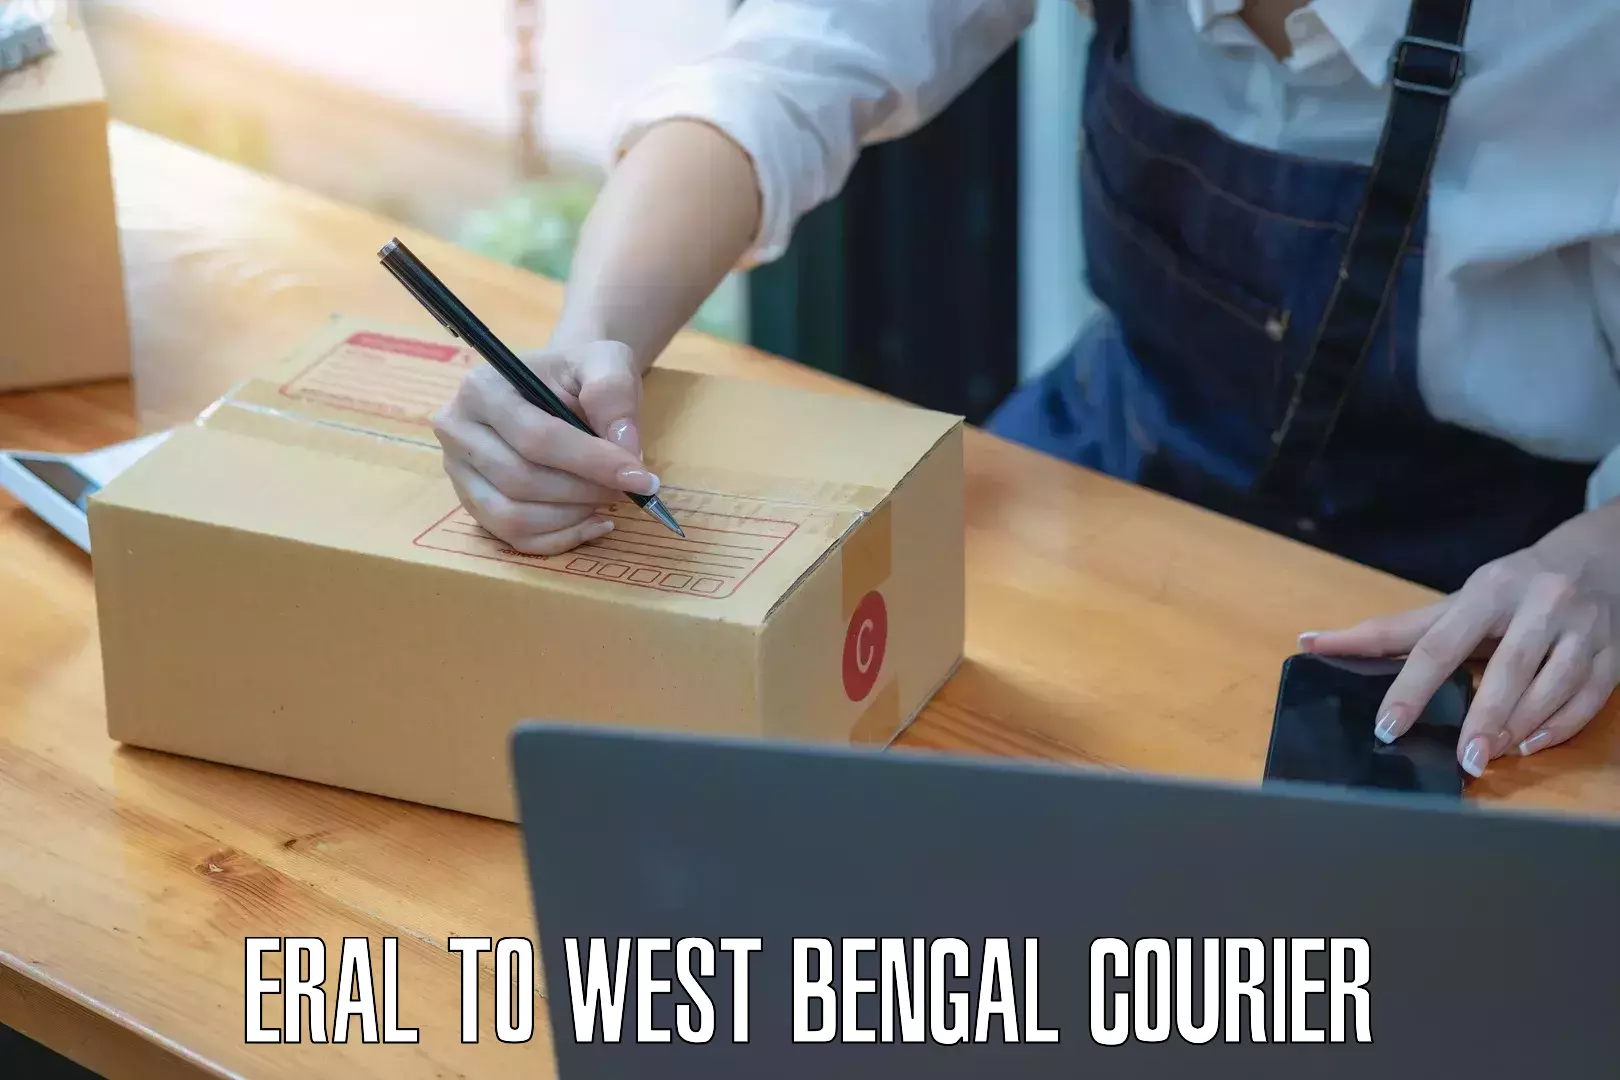 Courier service partnerships Eral to West Bengal